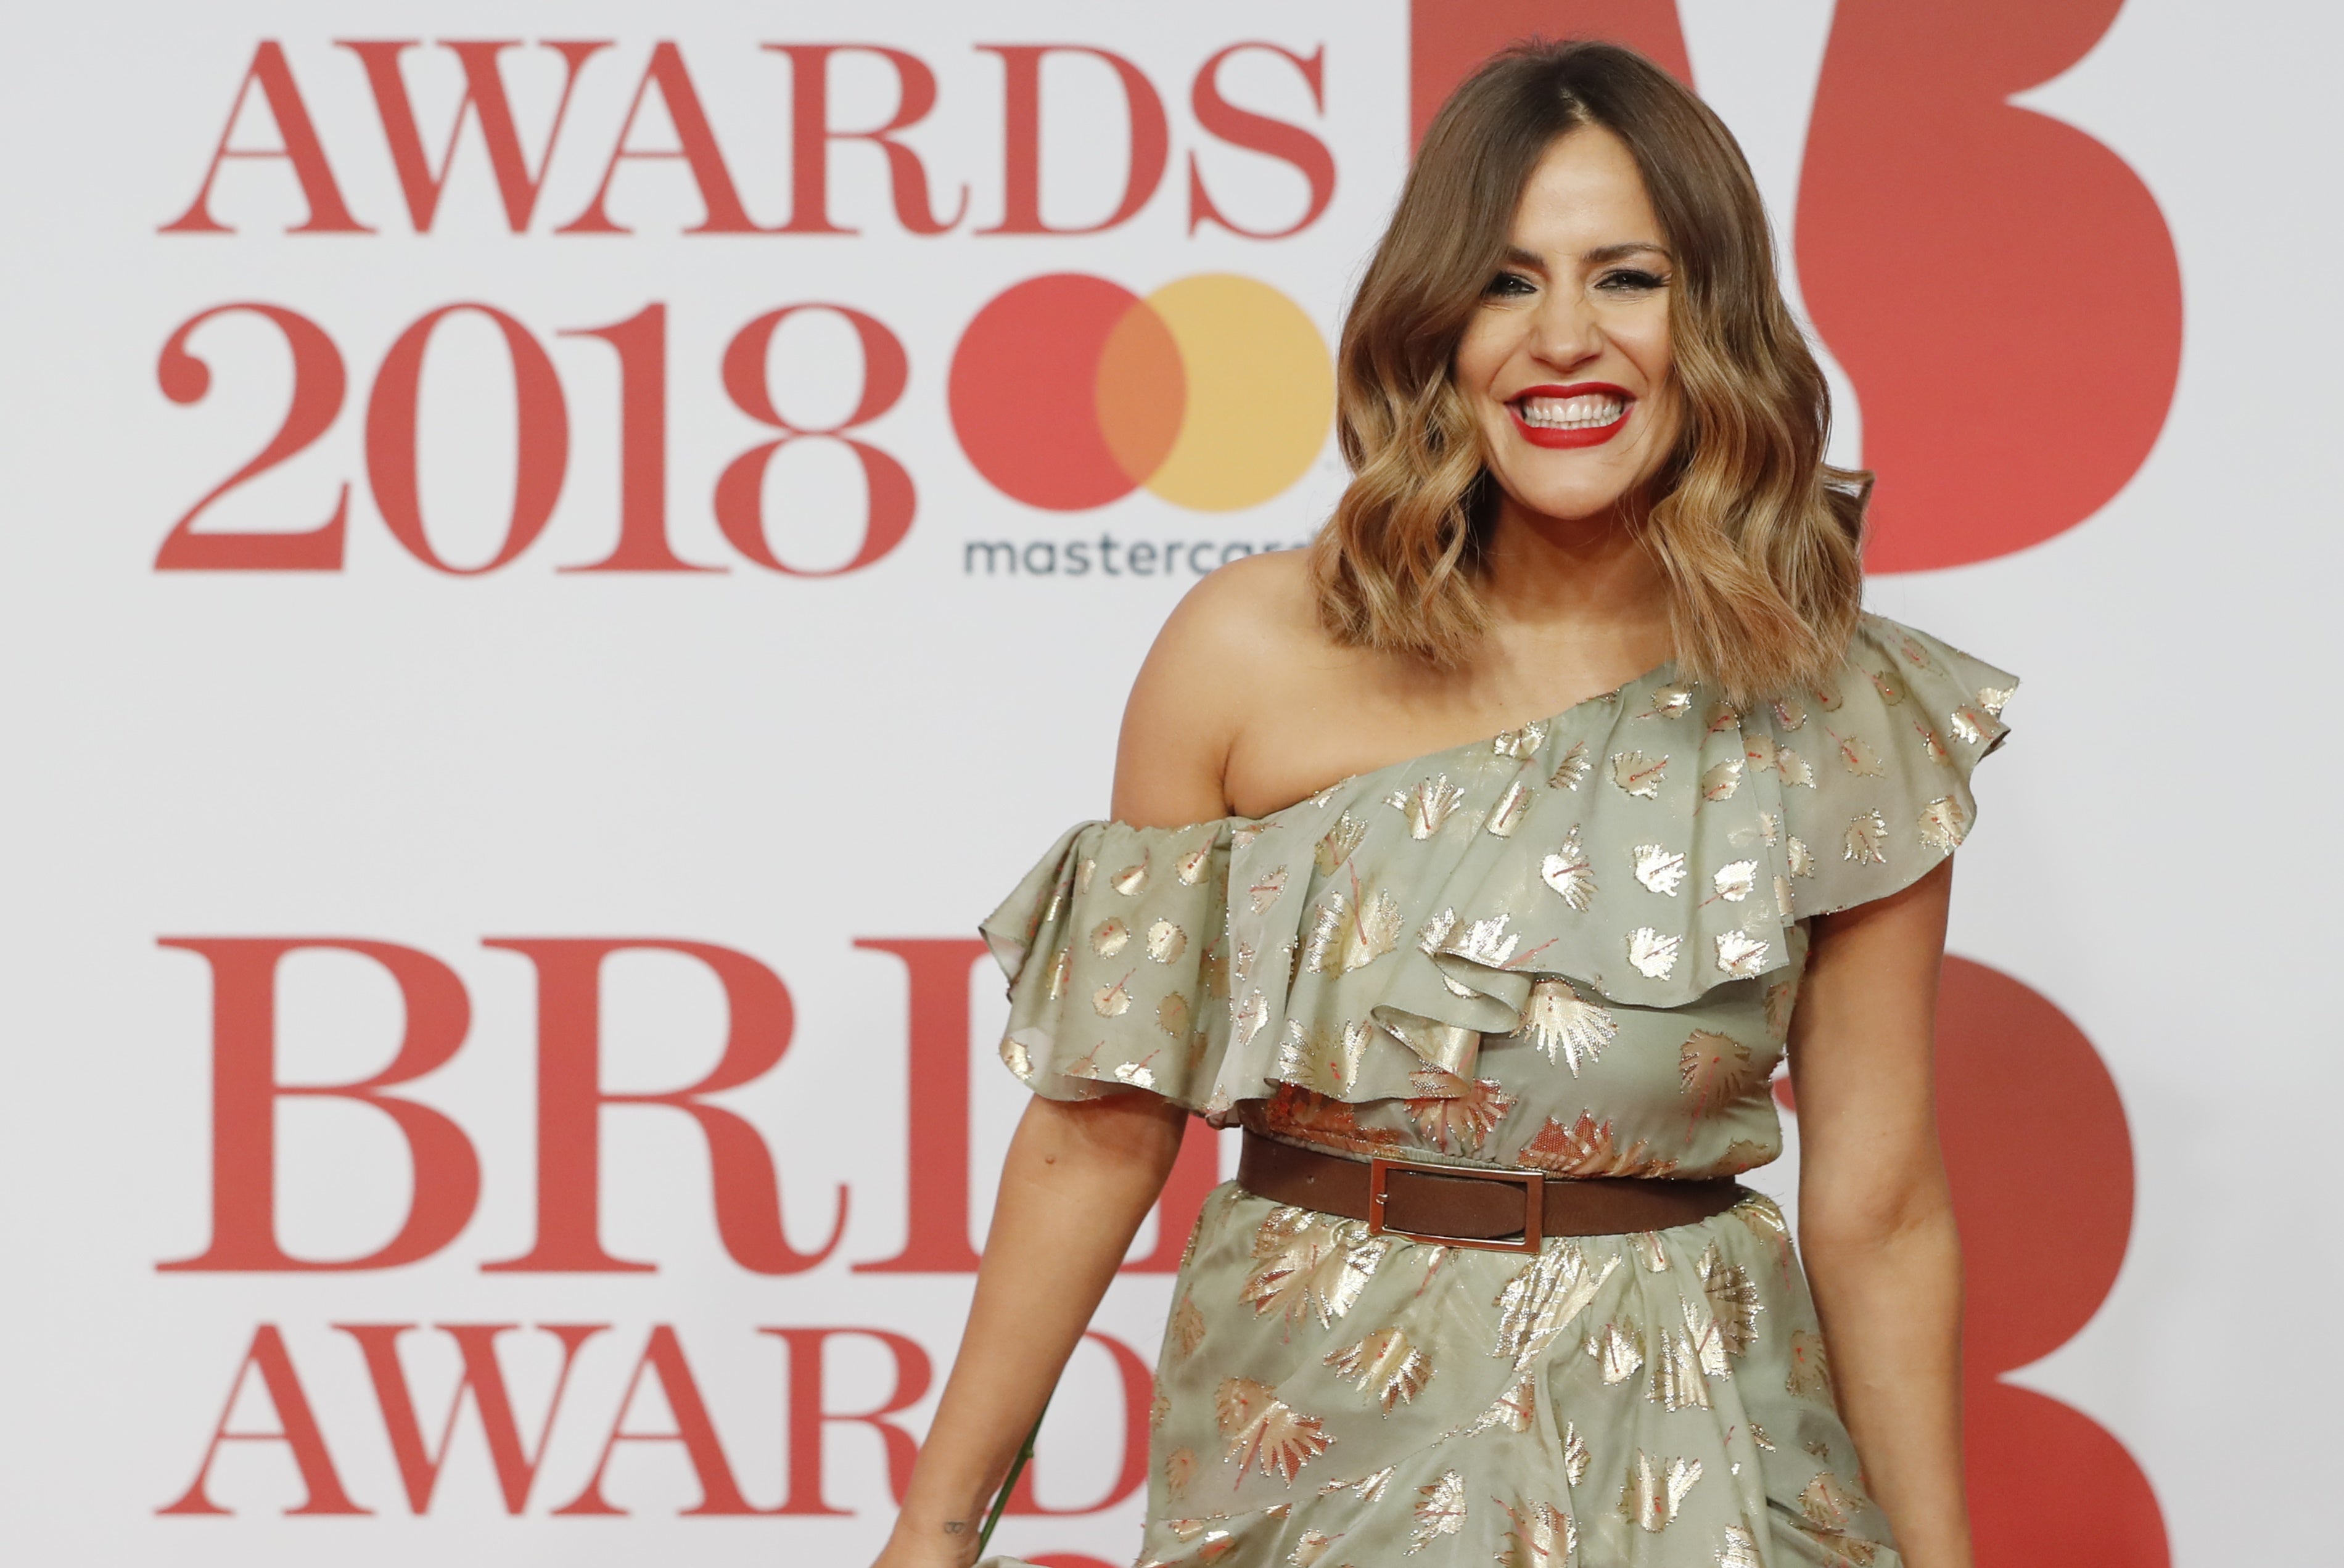 Caroline Flack, who died by suicide in February 2020